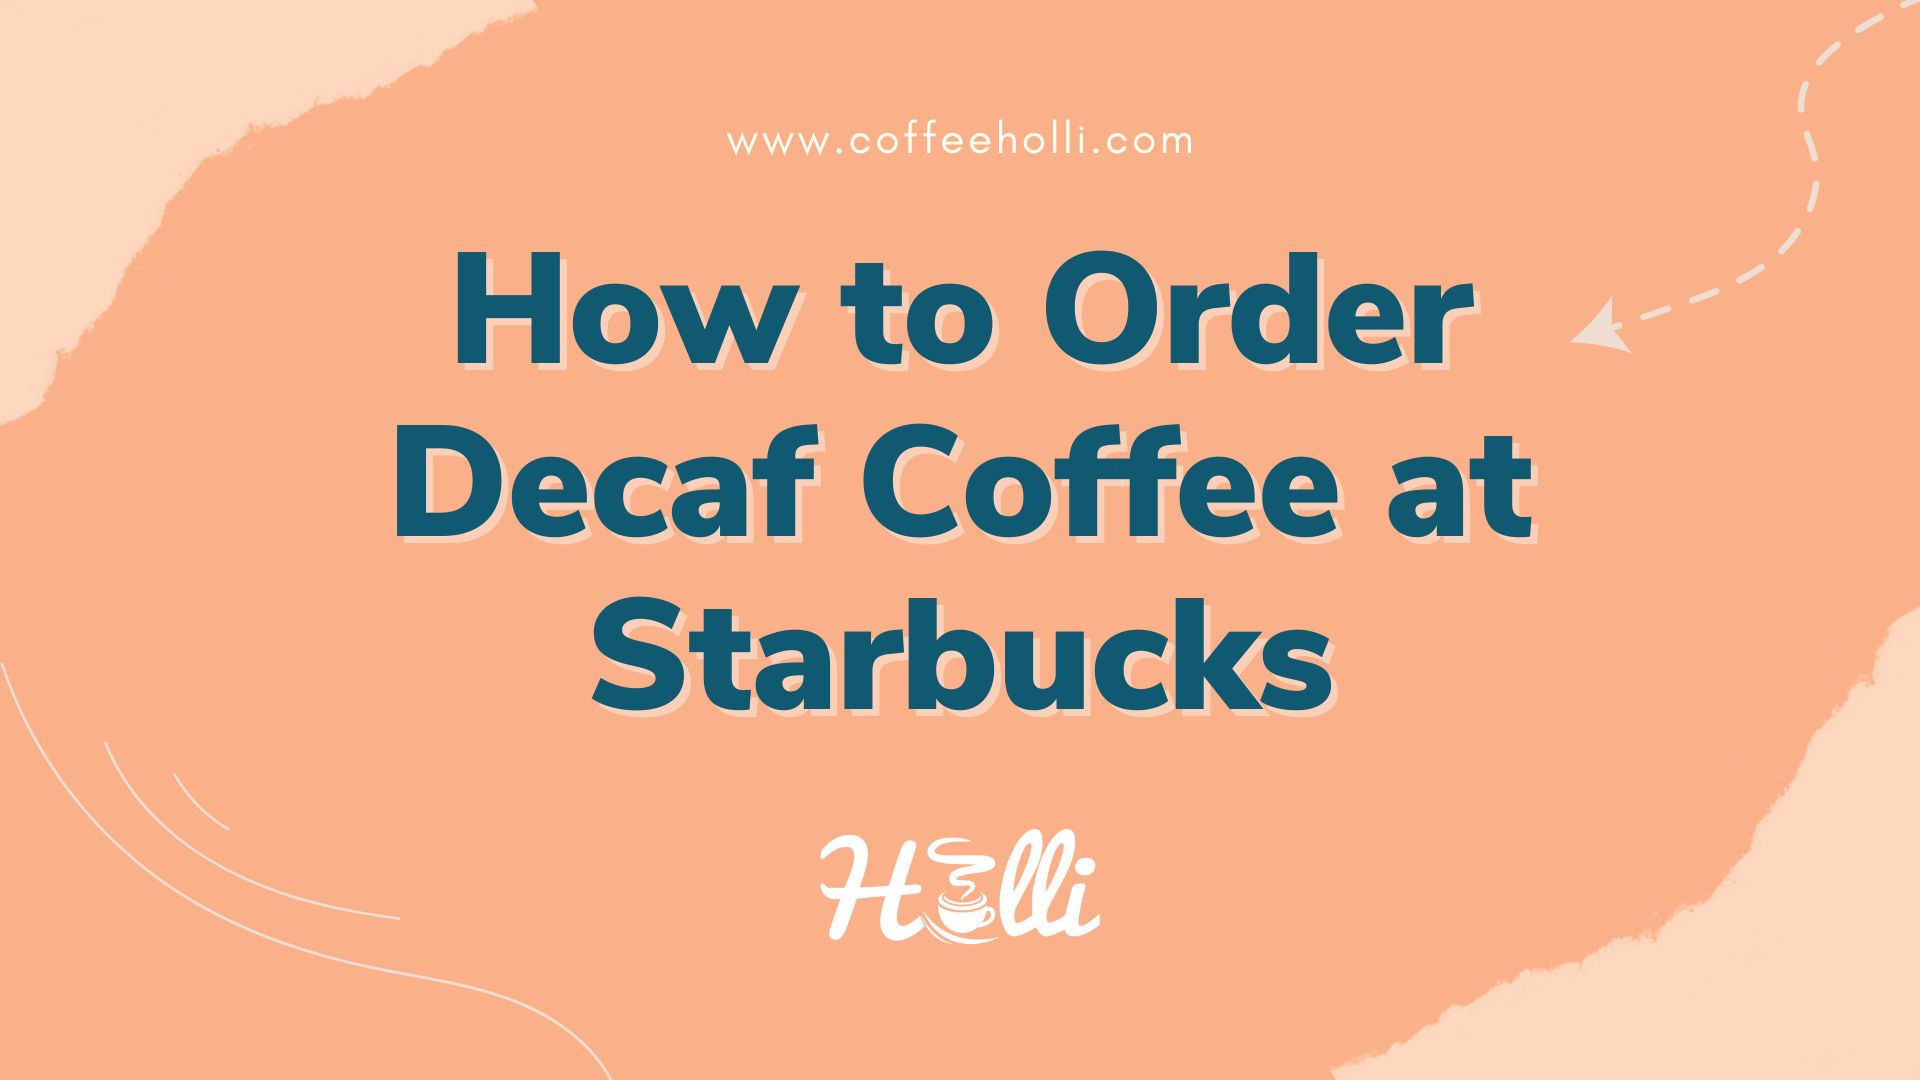 How to Order Decaf Coffee at Starbucks